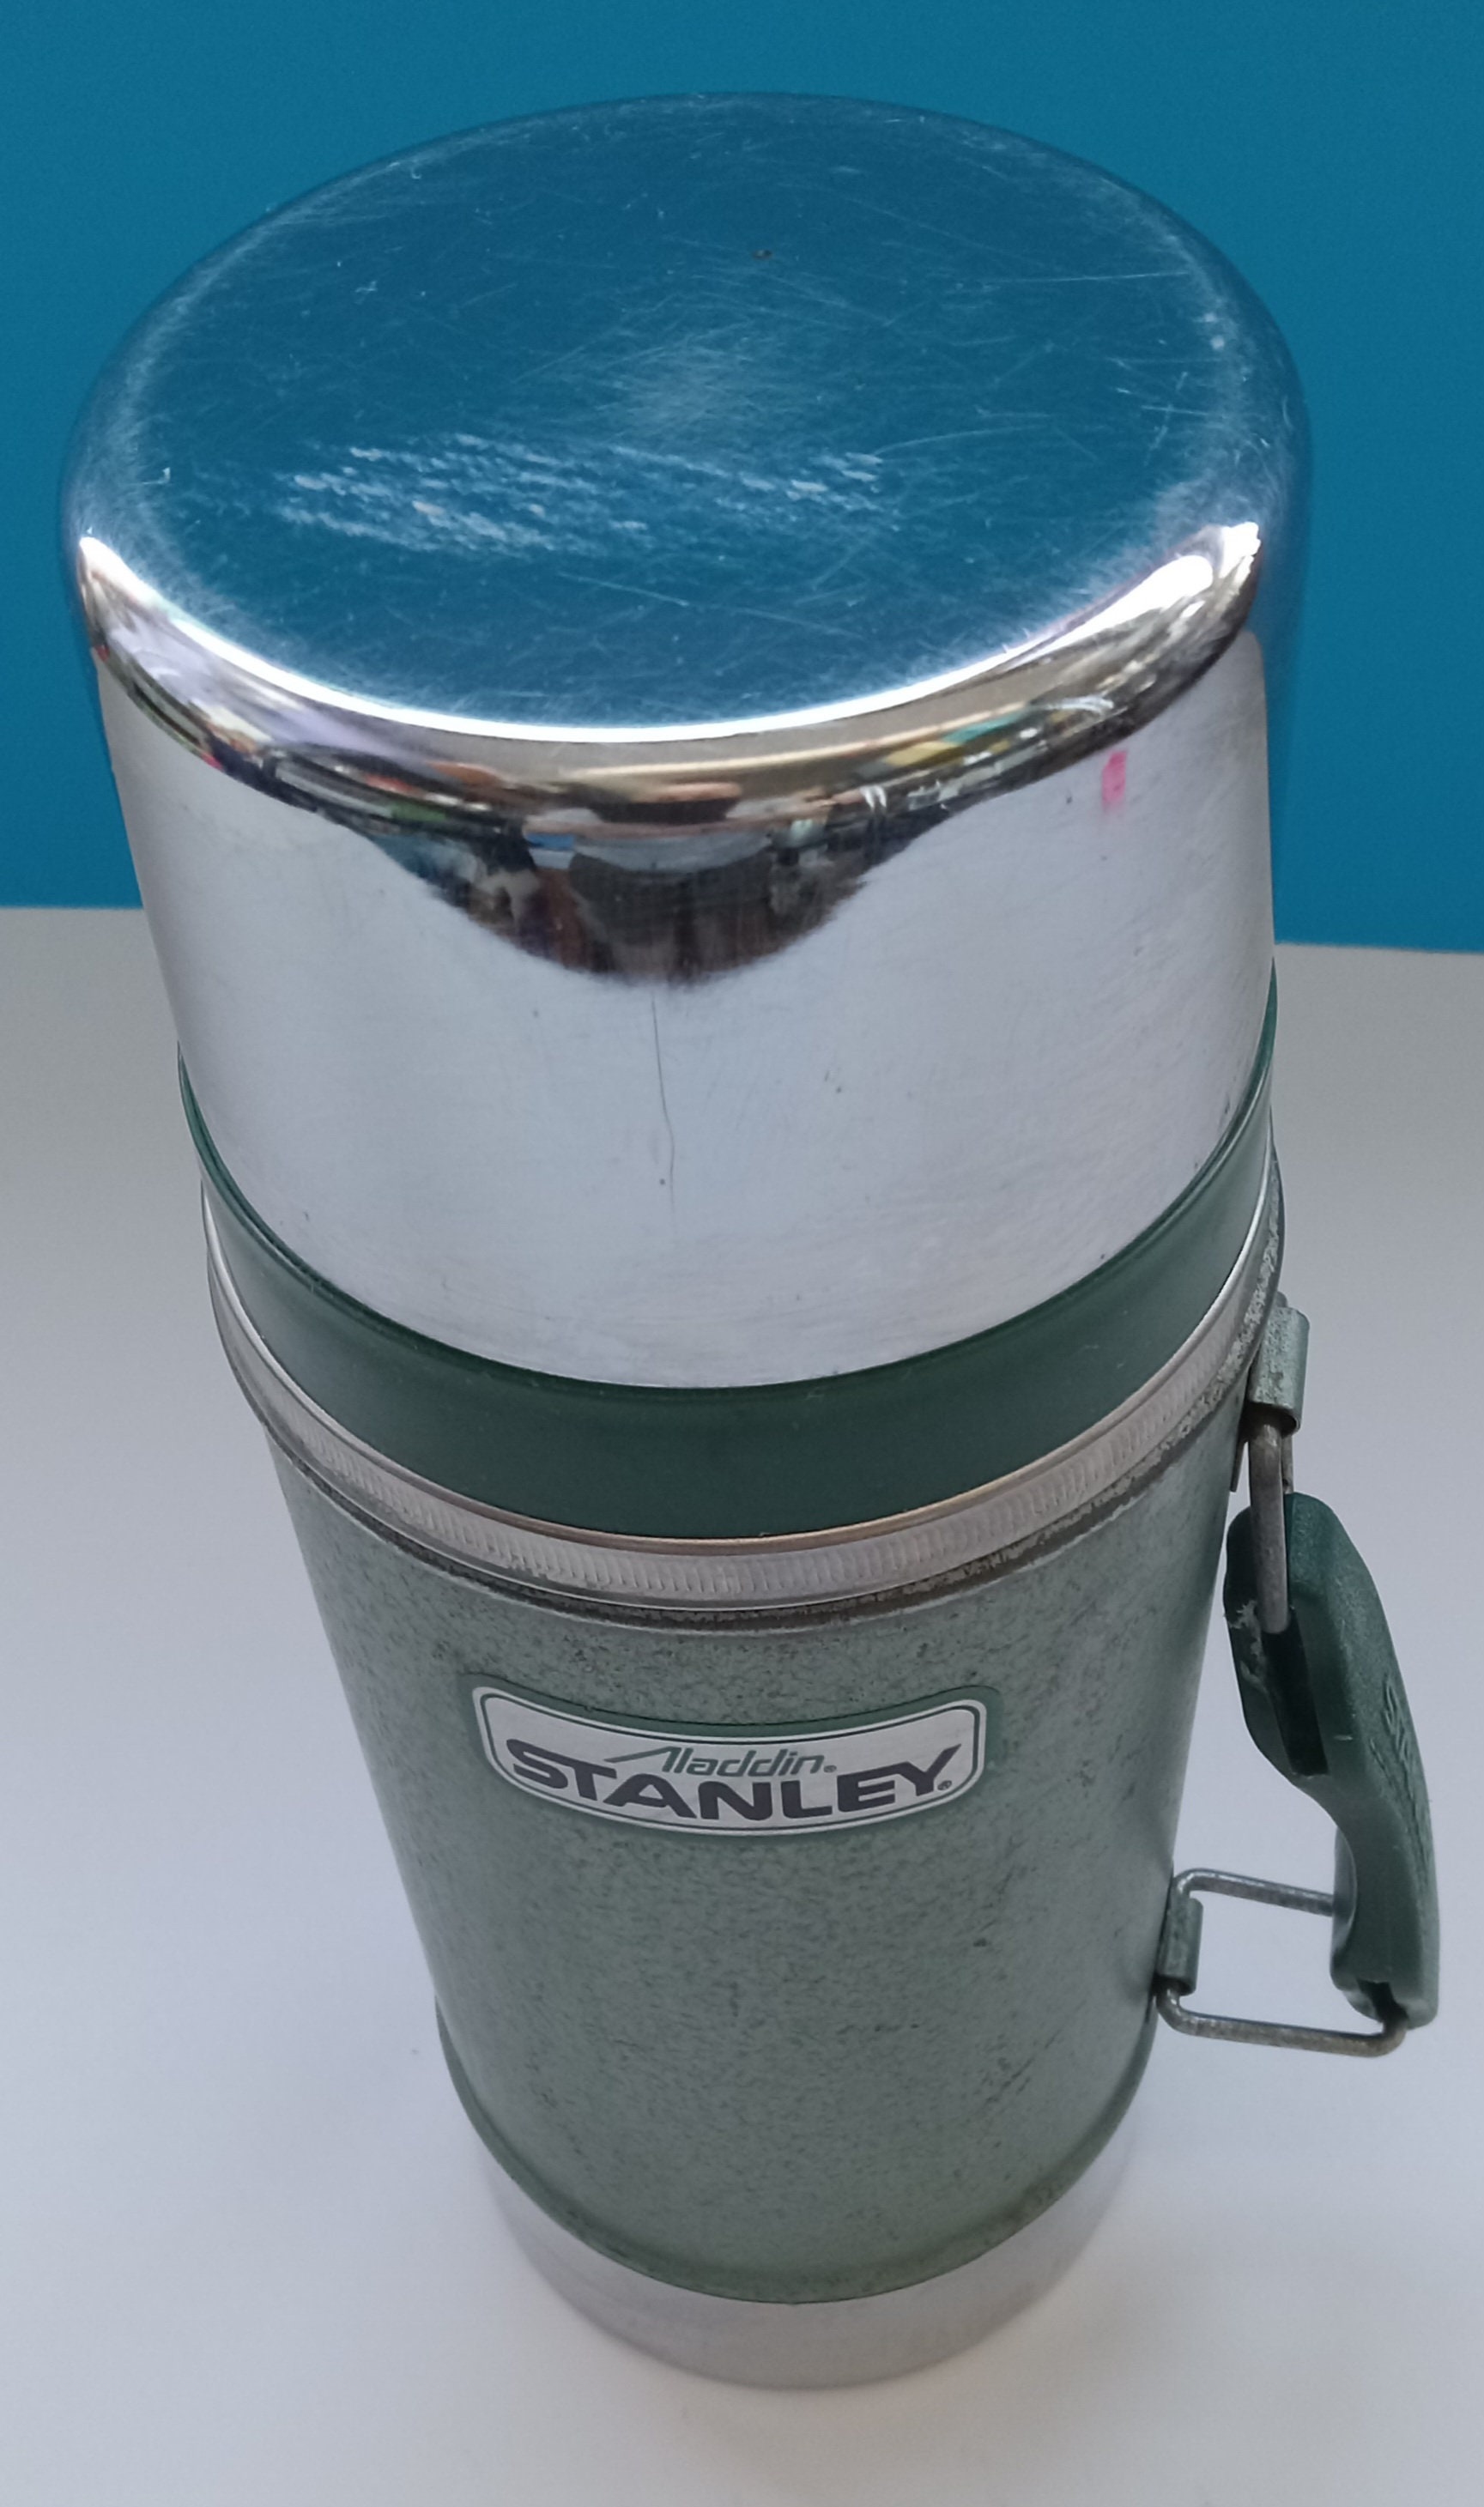 Vintage 1990 Aladdin Stanley Stainless Steel Thermos 24onz A-1350B